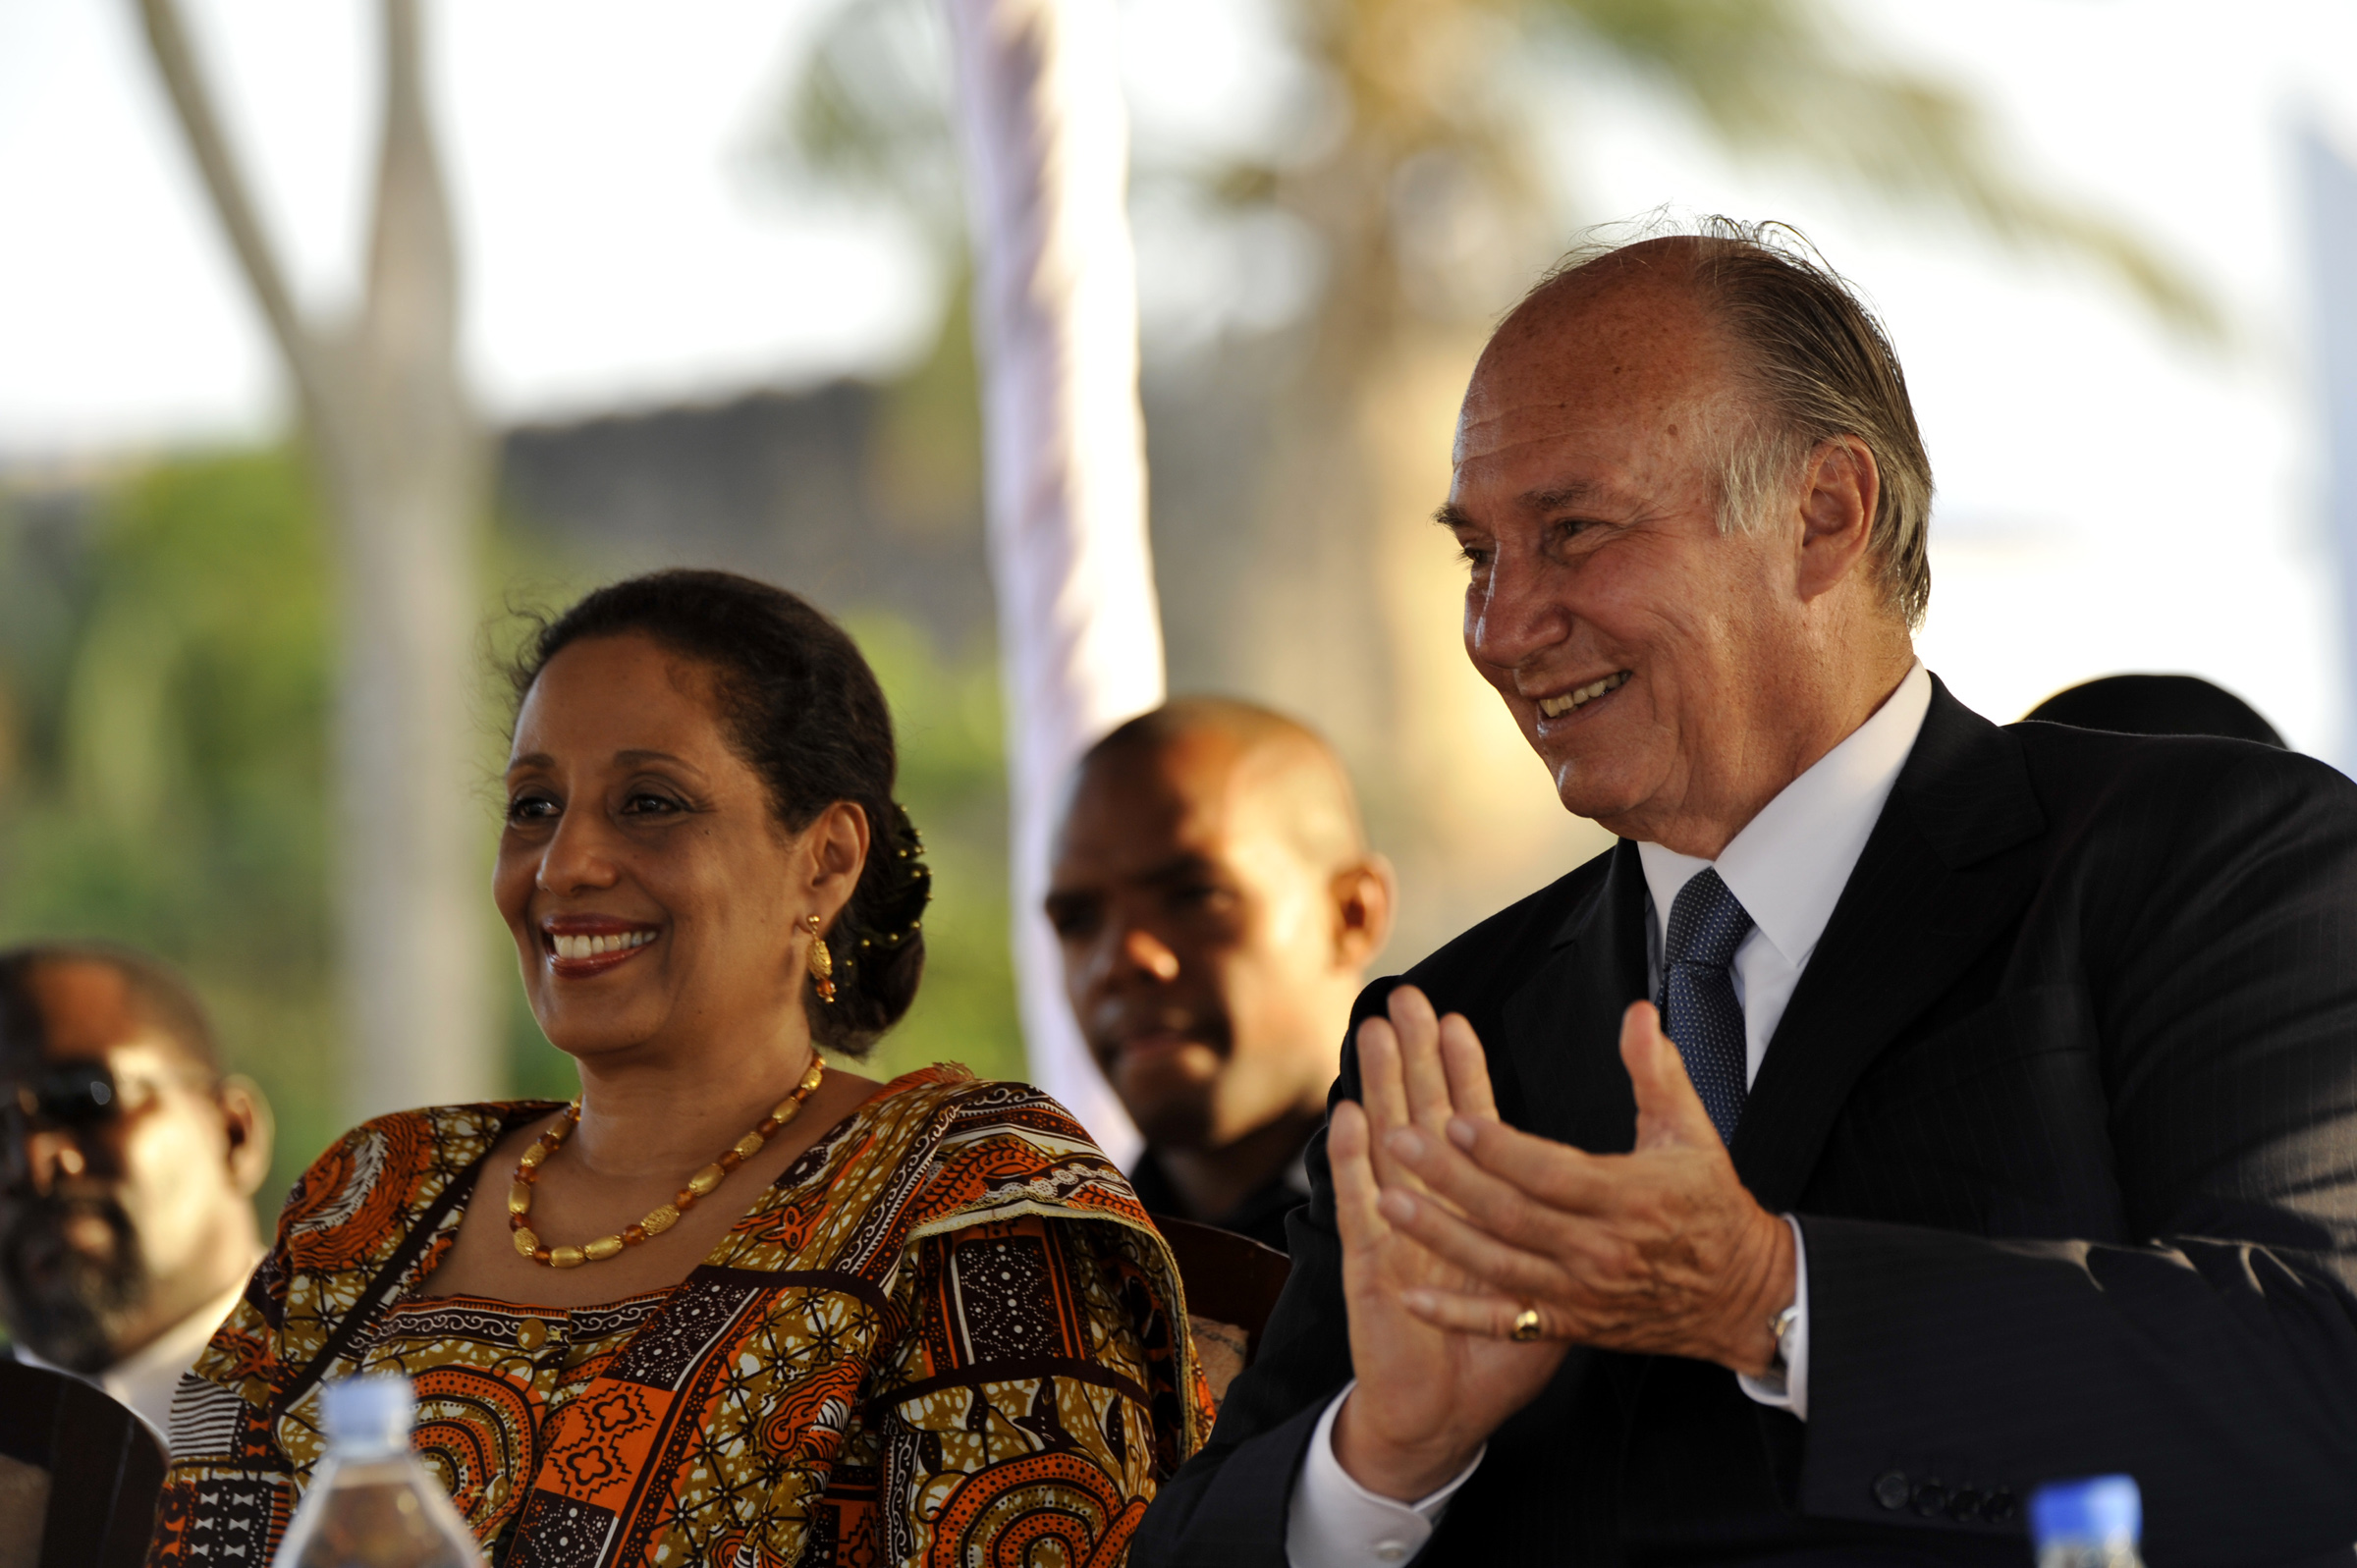 His Highness the Aga Khan and Her Excellency Madame Shadya Karume, First Lady of Zanzibar